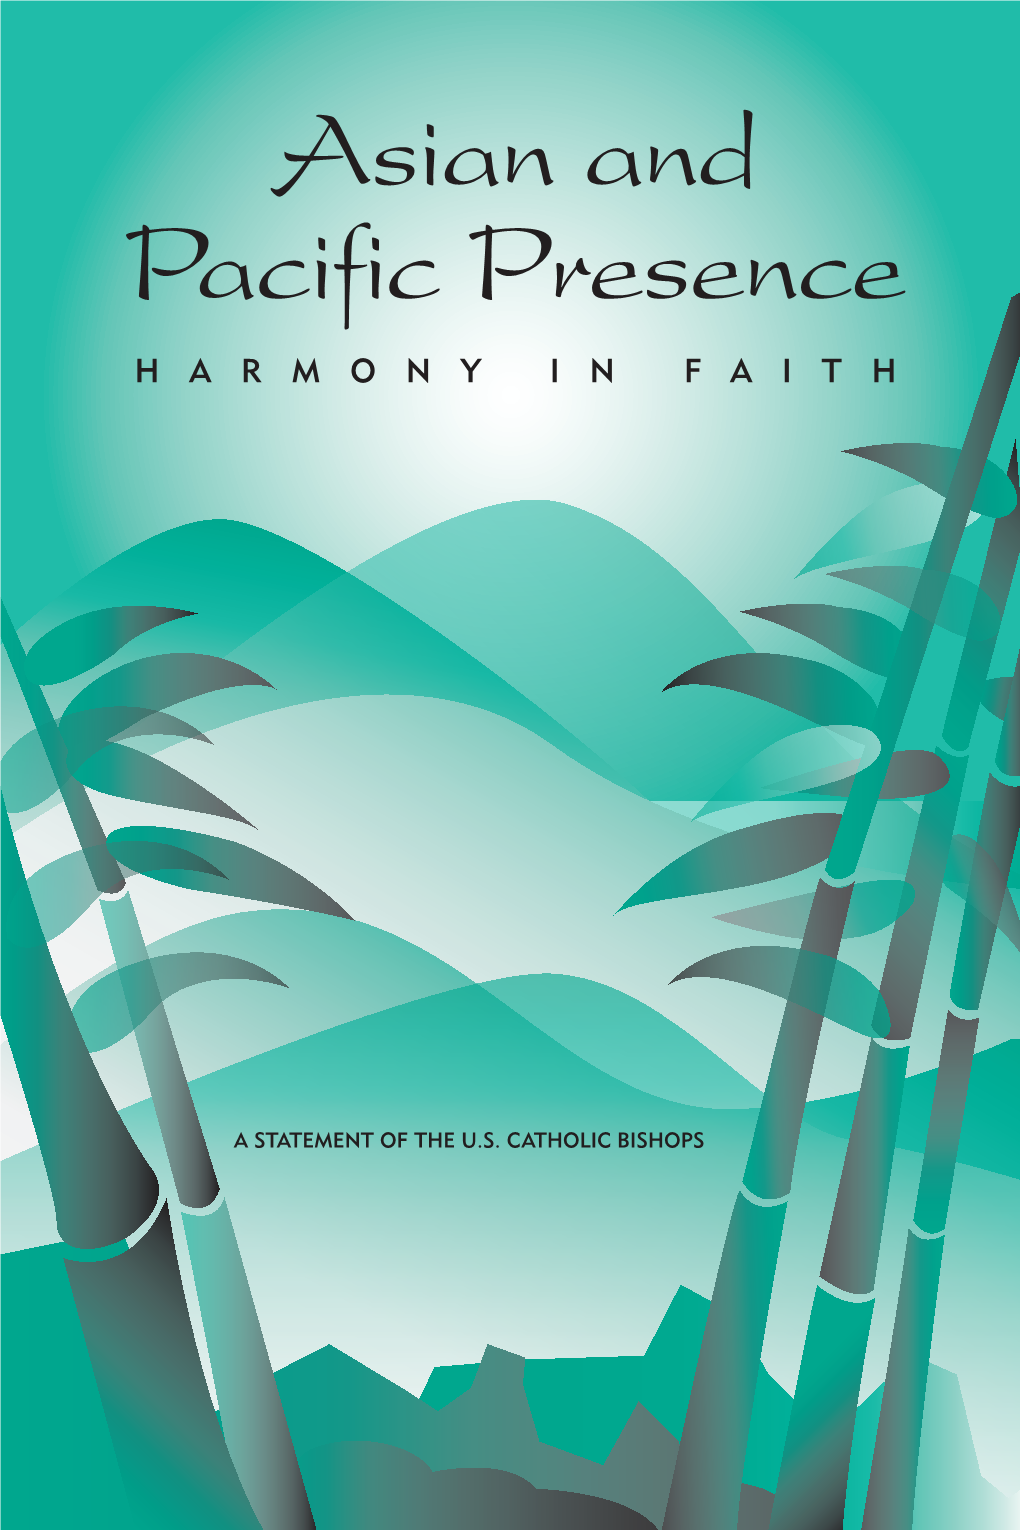 Asian and Pacific Presence: Harmony in Faith Was Developed by the Committee on Migration of the United States Conference of Catholic Bishops (USCCB)